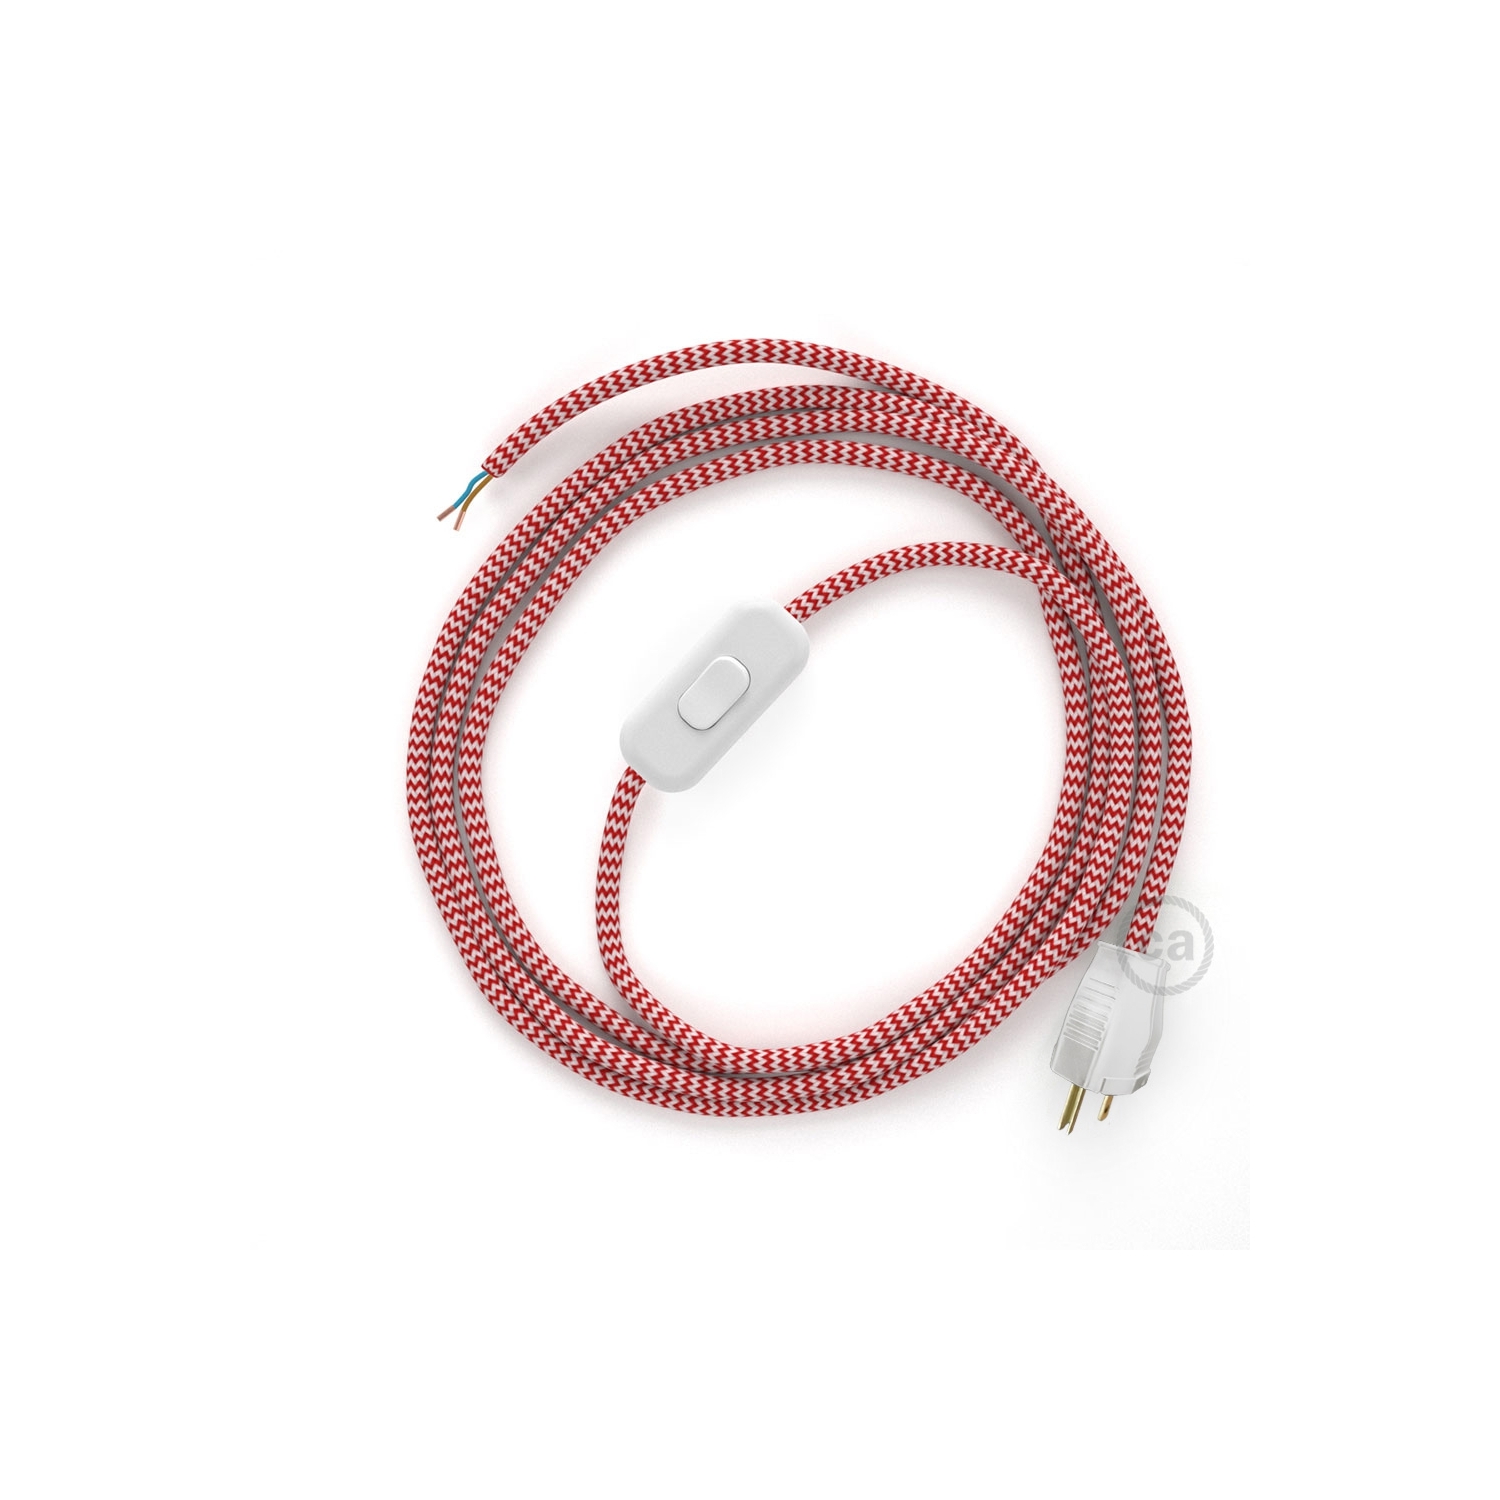 Power Cord with in-line switch, RZ09 Red & White Chevron - Choose color of switch/plug